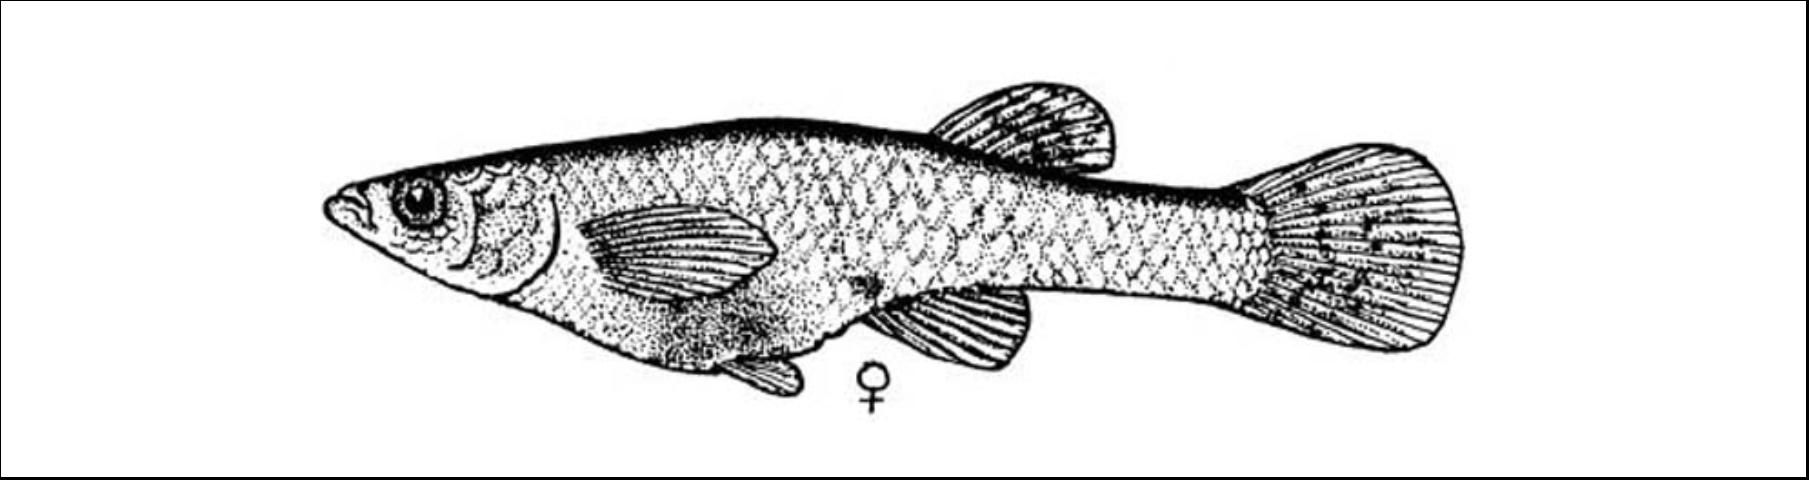 Figure 6. Eastern Mosquitofish (Gambusia holbrooki) female to 1 1/2 inches. Plain little fish with two stripes on the tail fin. Non-game fish. Excellent mosquito-controlling species.